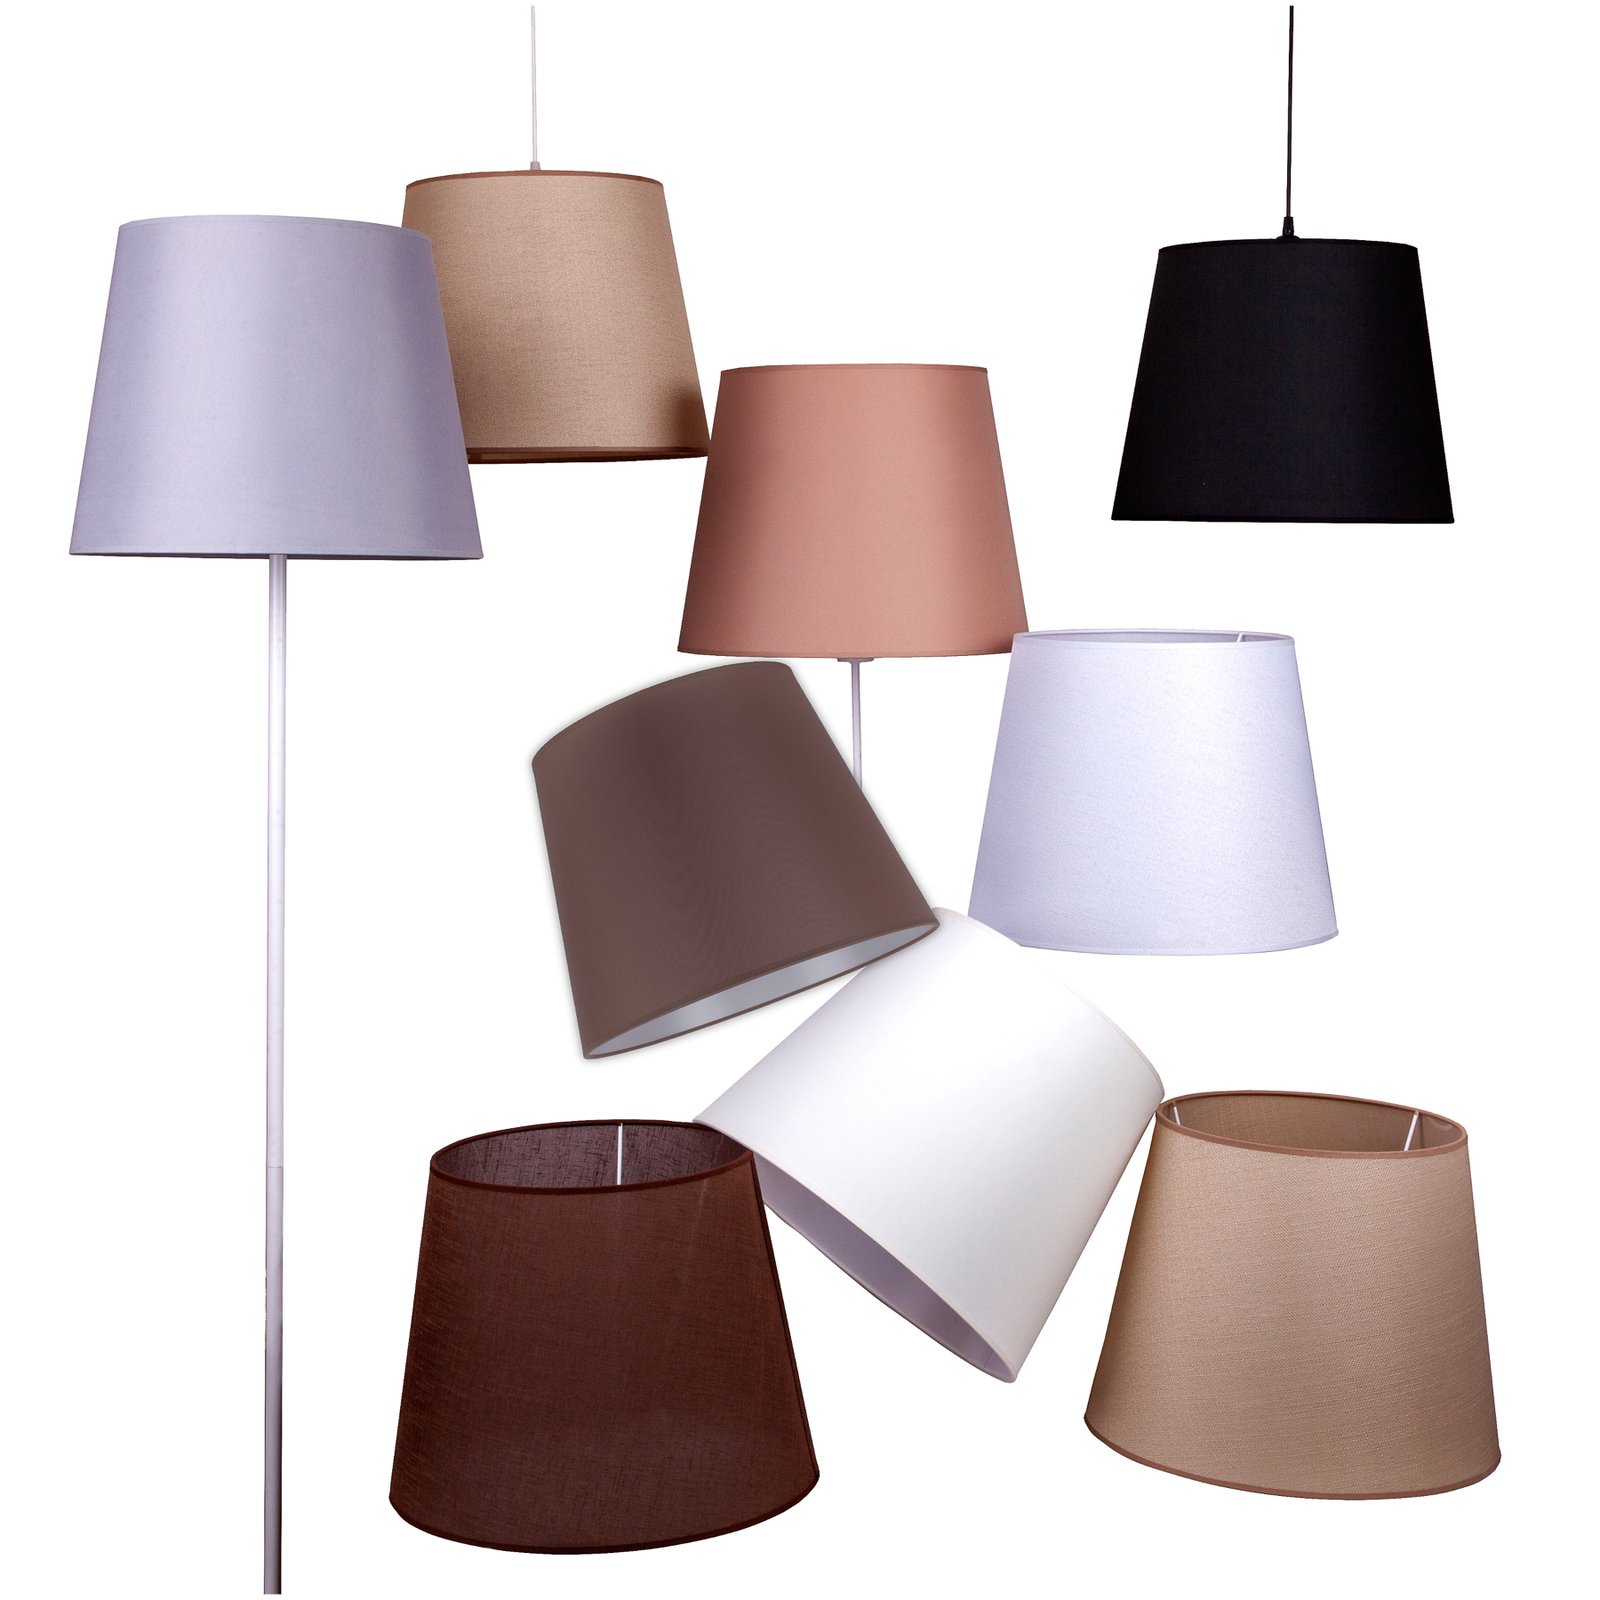 Classic L lampshade for hanging lights, graphite